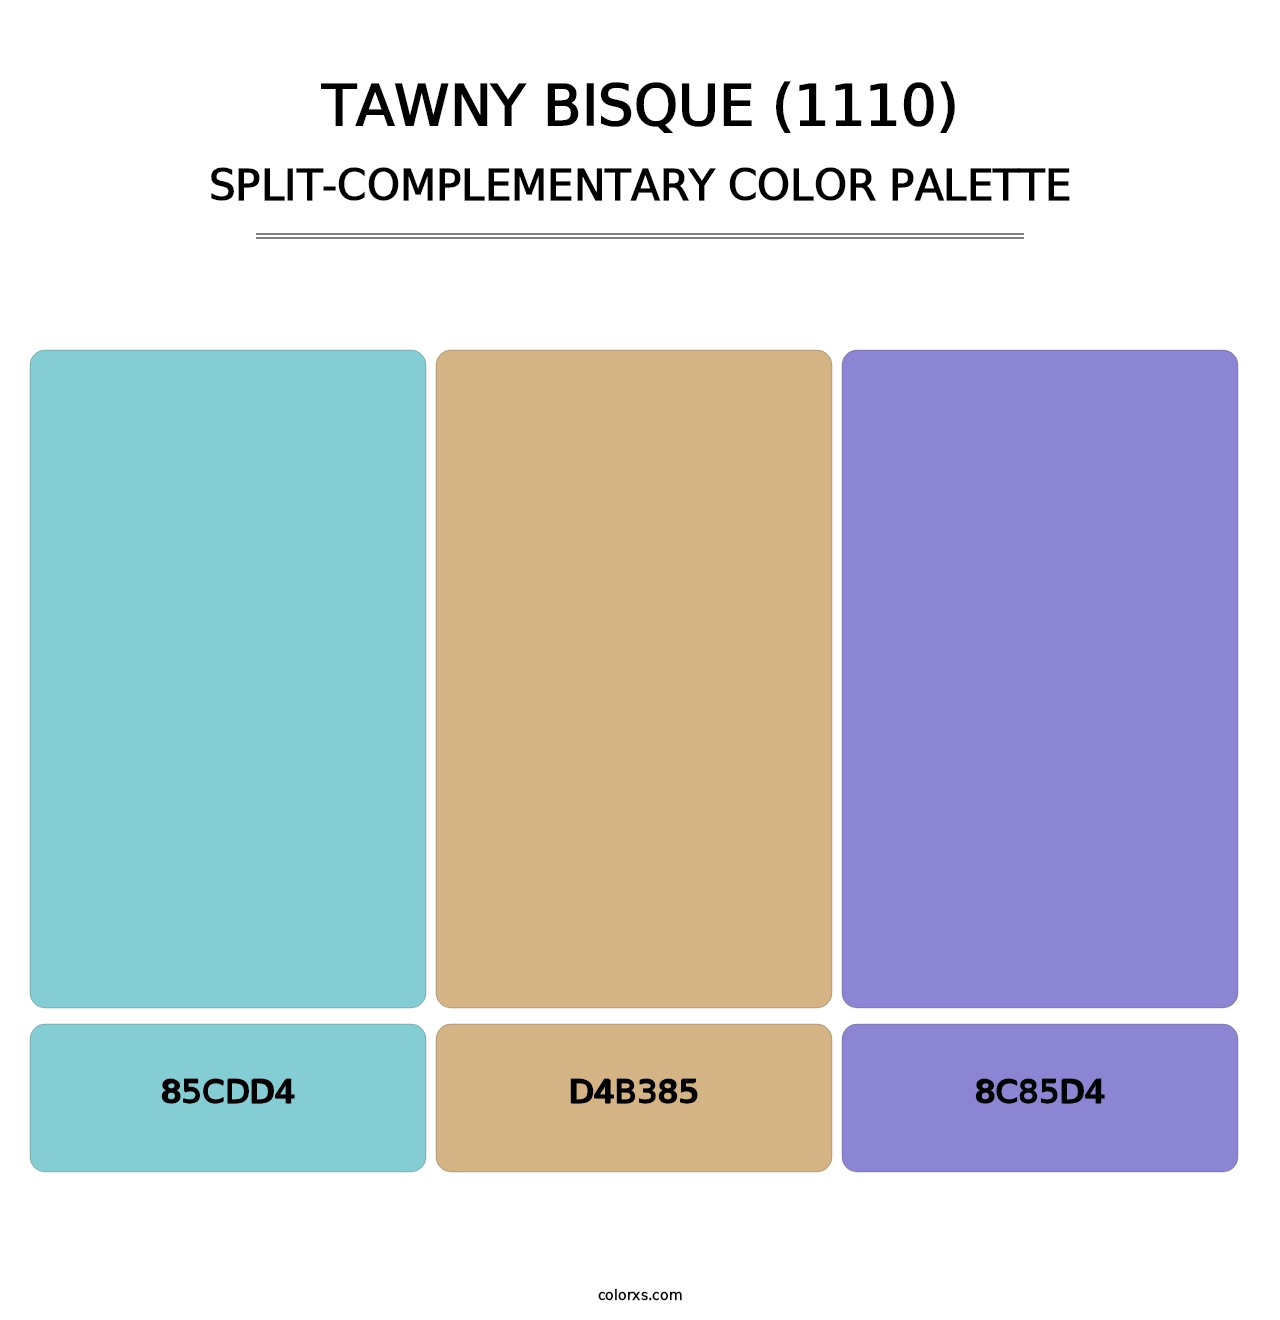 Tawny Bisque (1110) - Split-Complementary Color Palette